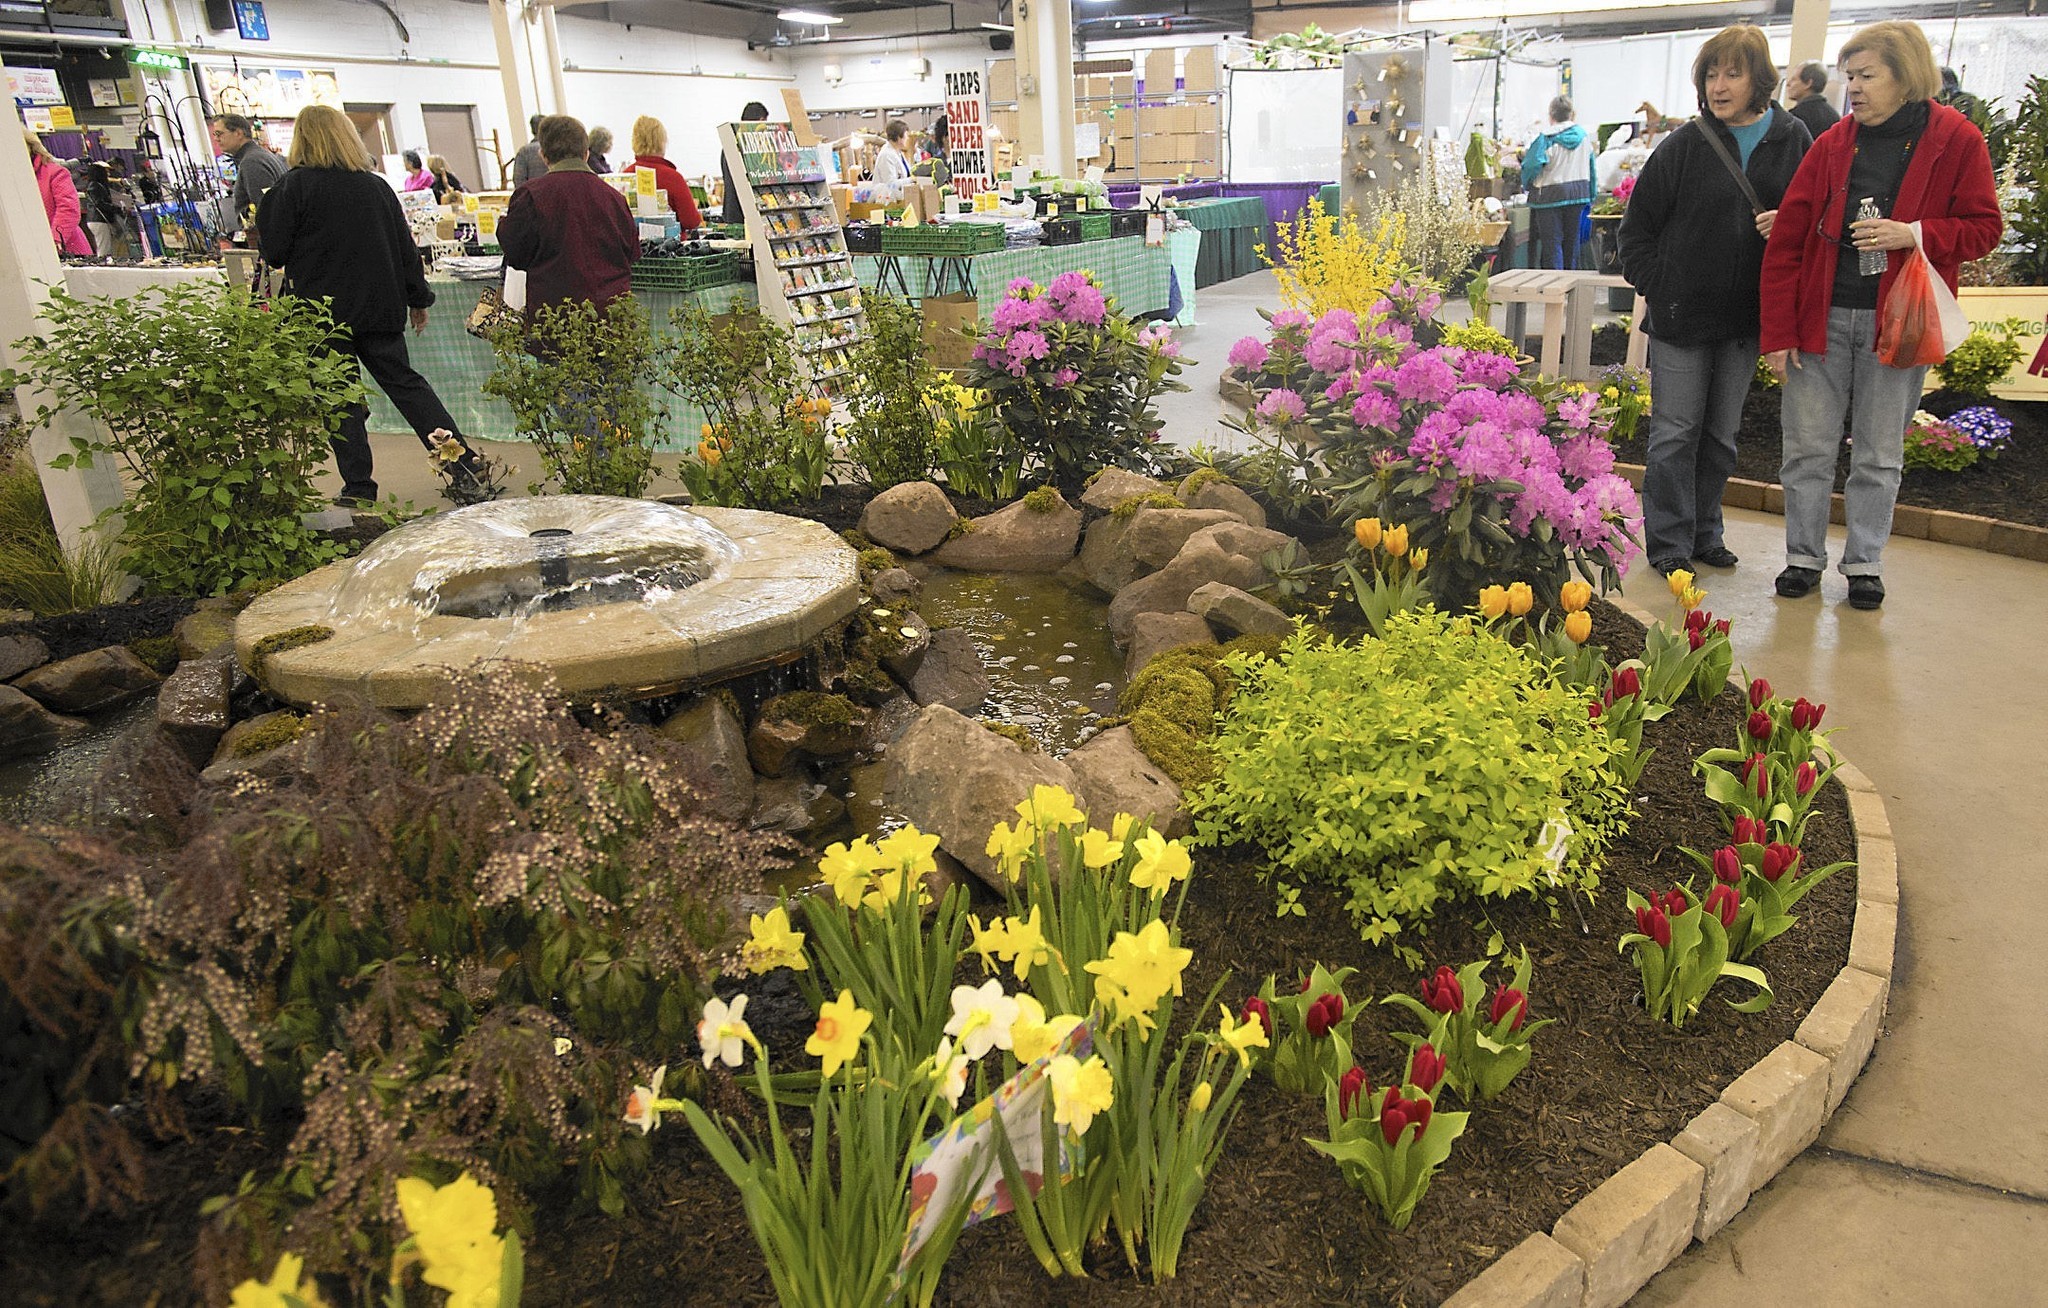 lehigh valley flower show blooms in allentown - the morning call